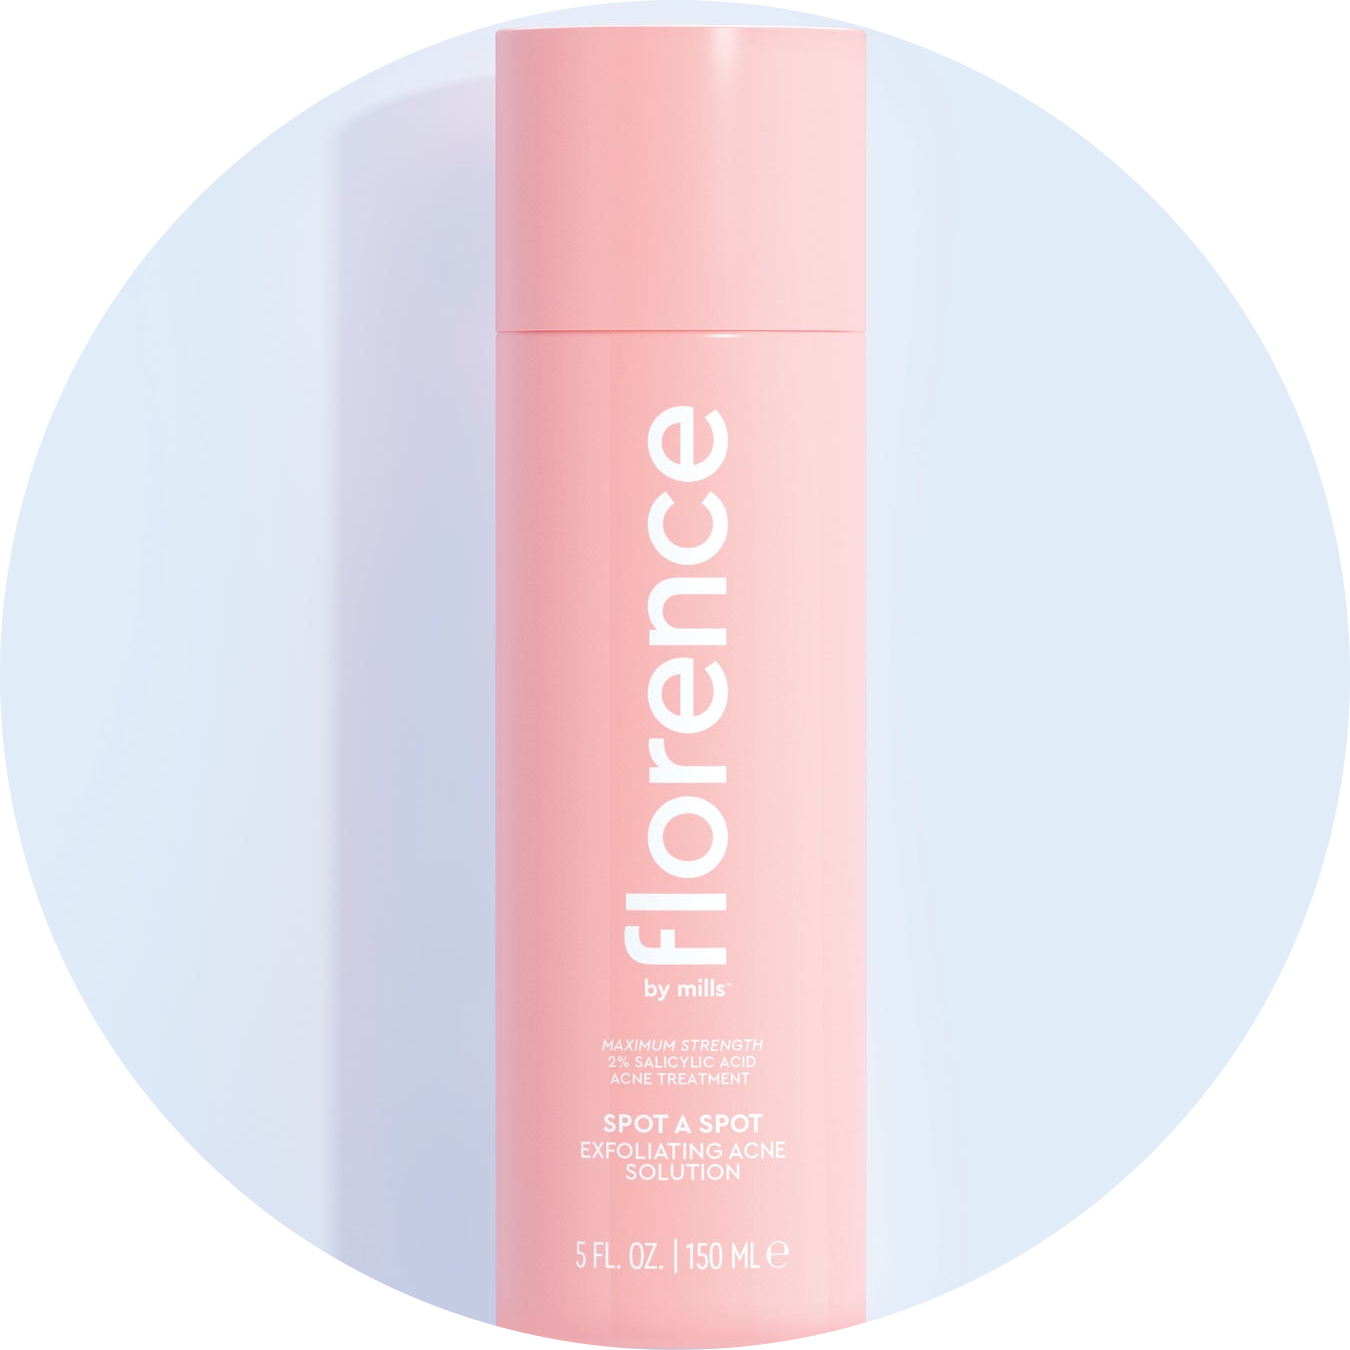 SPOT A SPOT EXFOLIATING ACNE SOLUTION NudeFace Chile